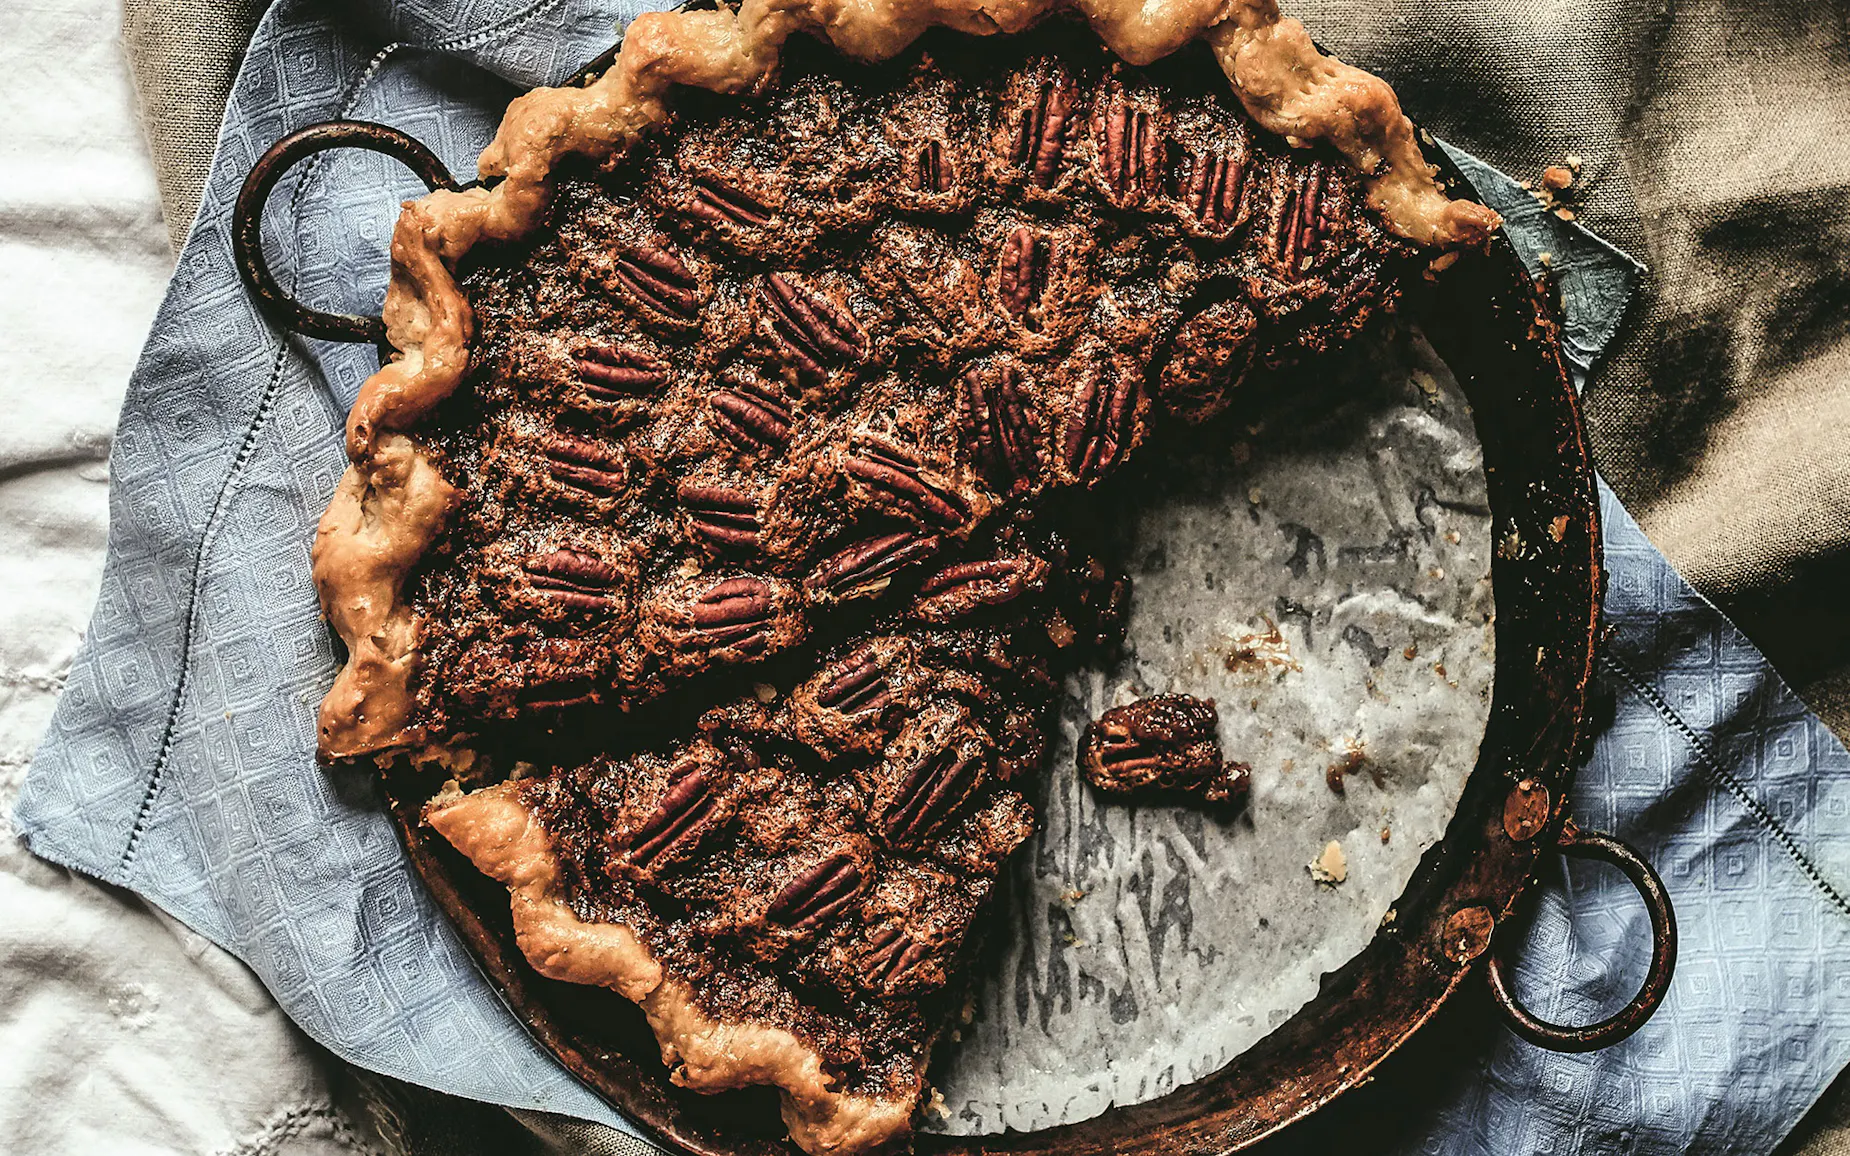 A pecan pie with a few slices taken out of the pan